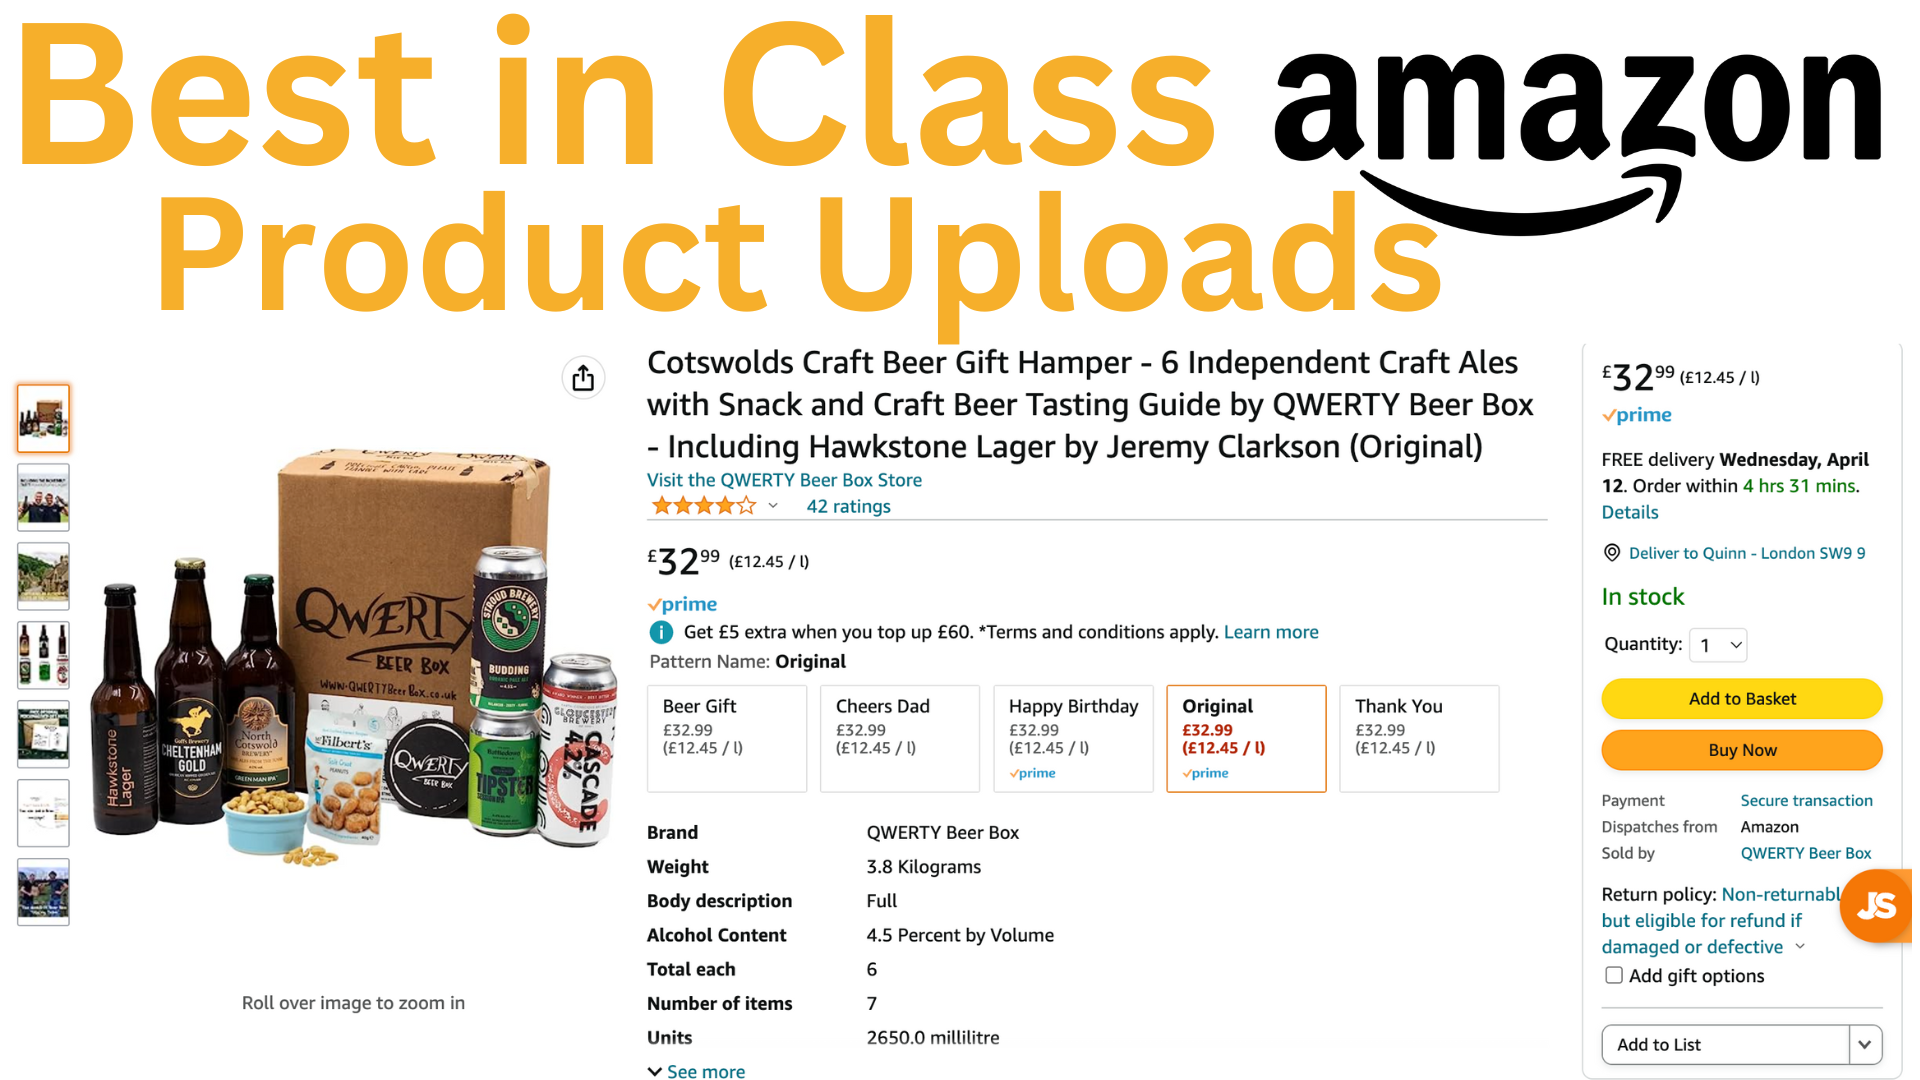 How to Upload a 'Best in Class' Amazon Listing